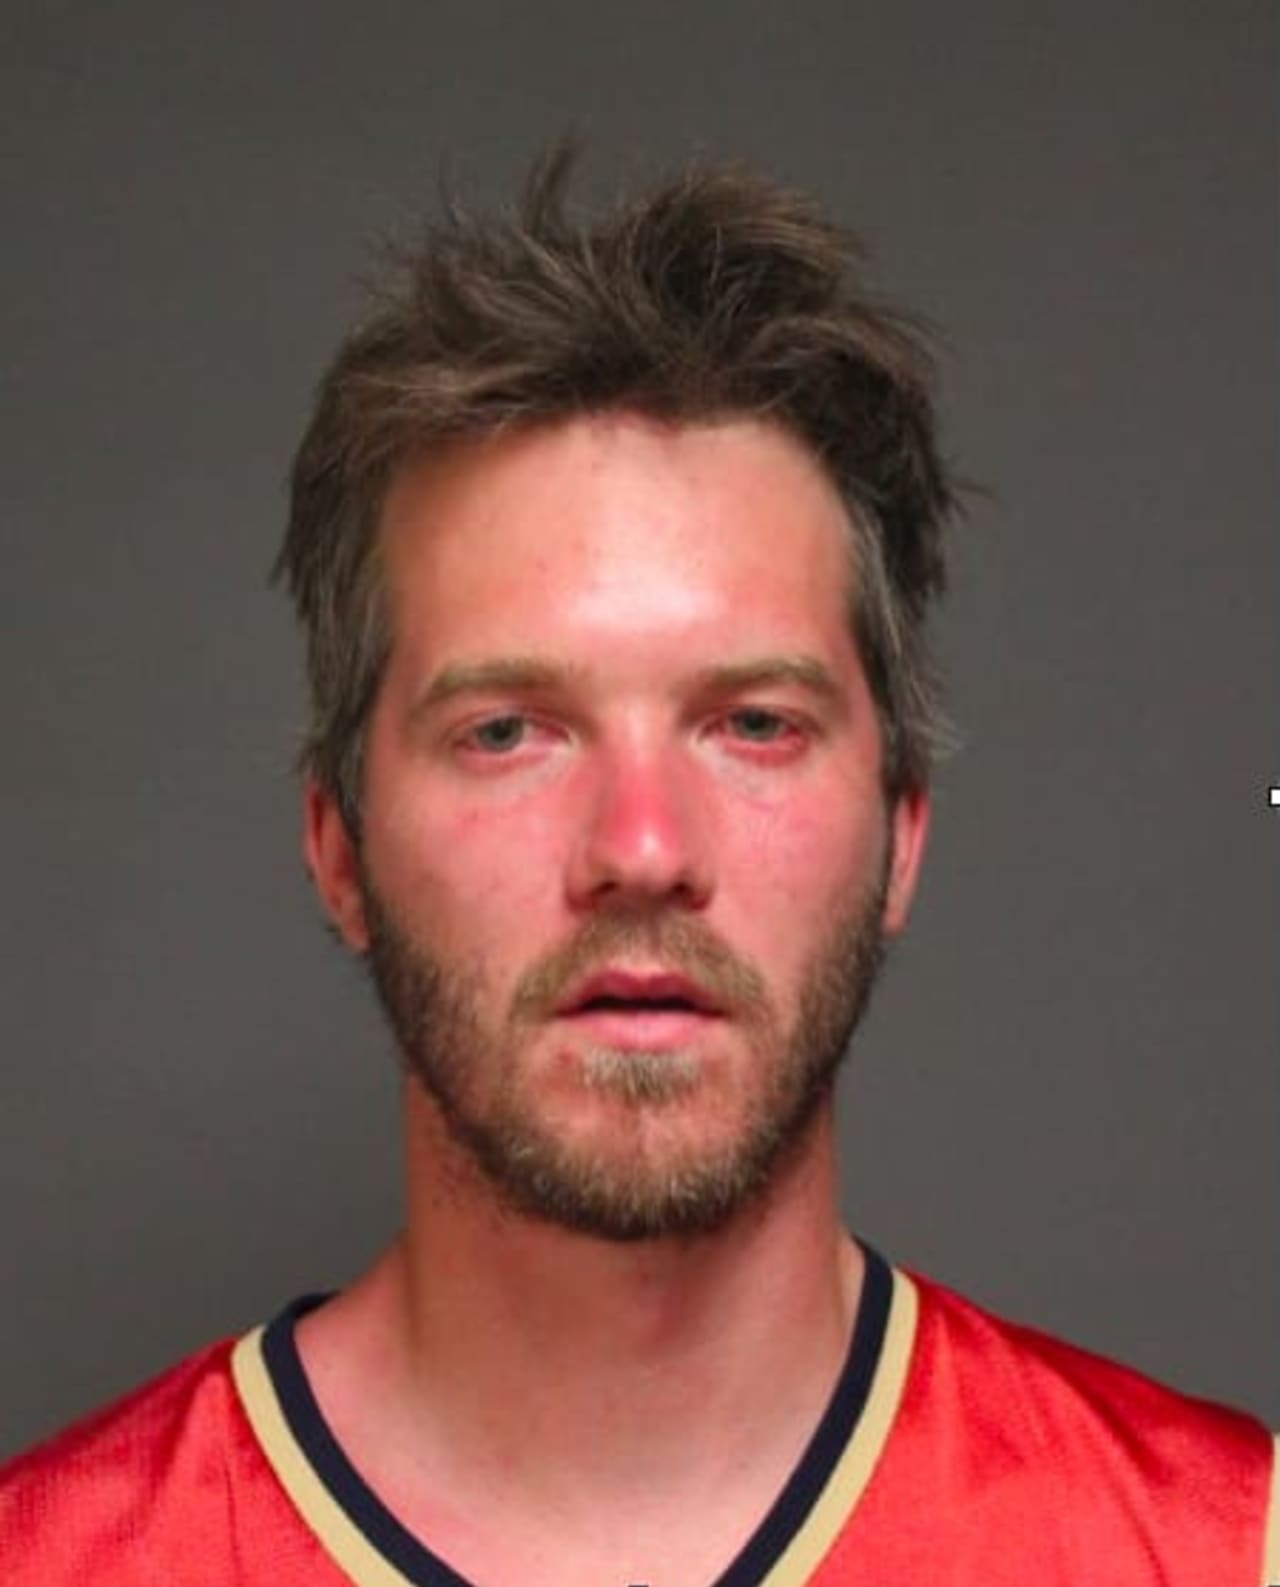 James Baekeland Davis was charged by Fairfield Police with use and possession of drug paraphernalia, possession of a controlled substance, reckless driving, and driving under the influence of alcohol, police said.